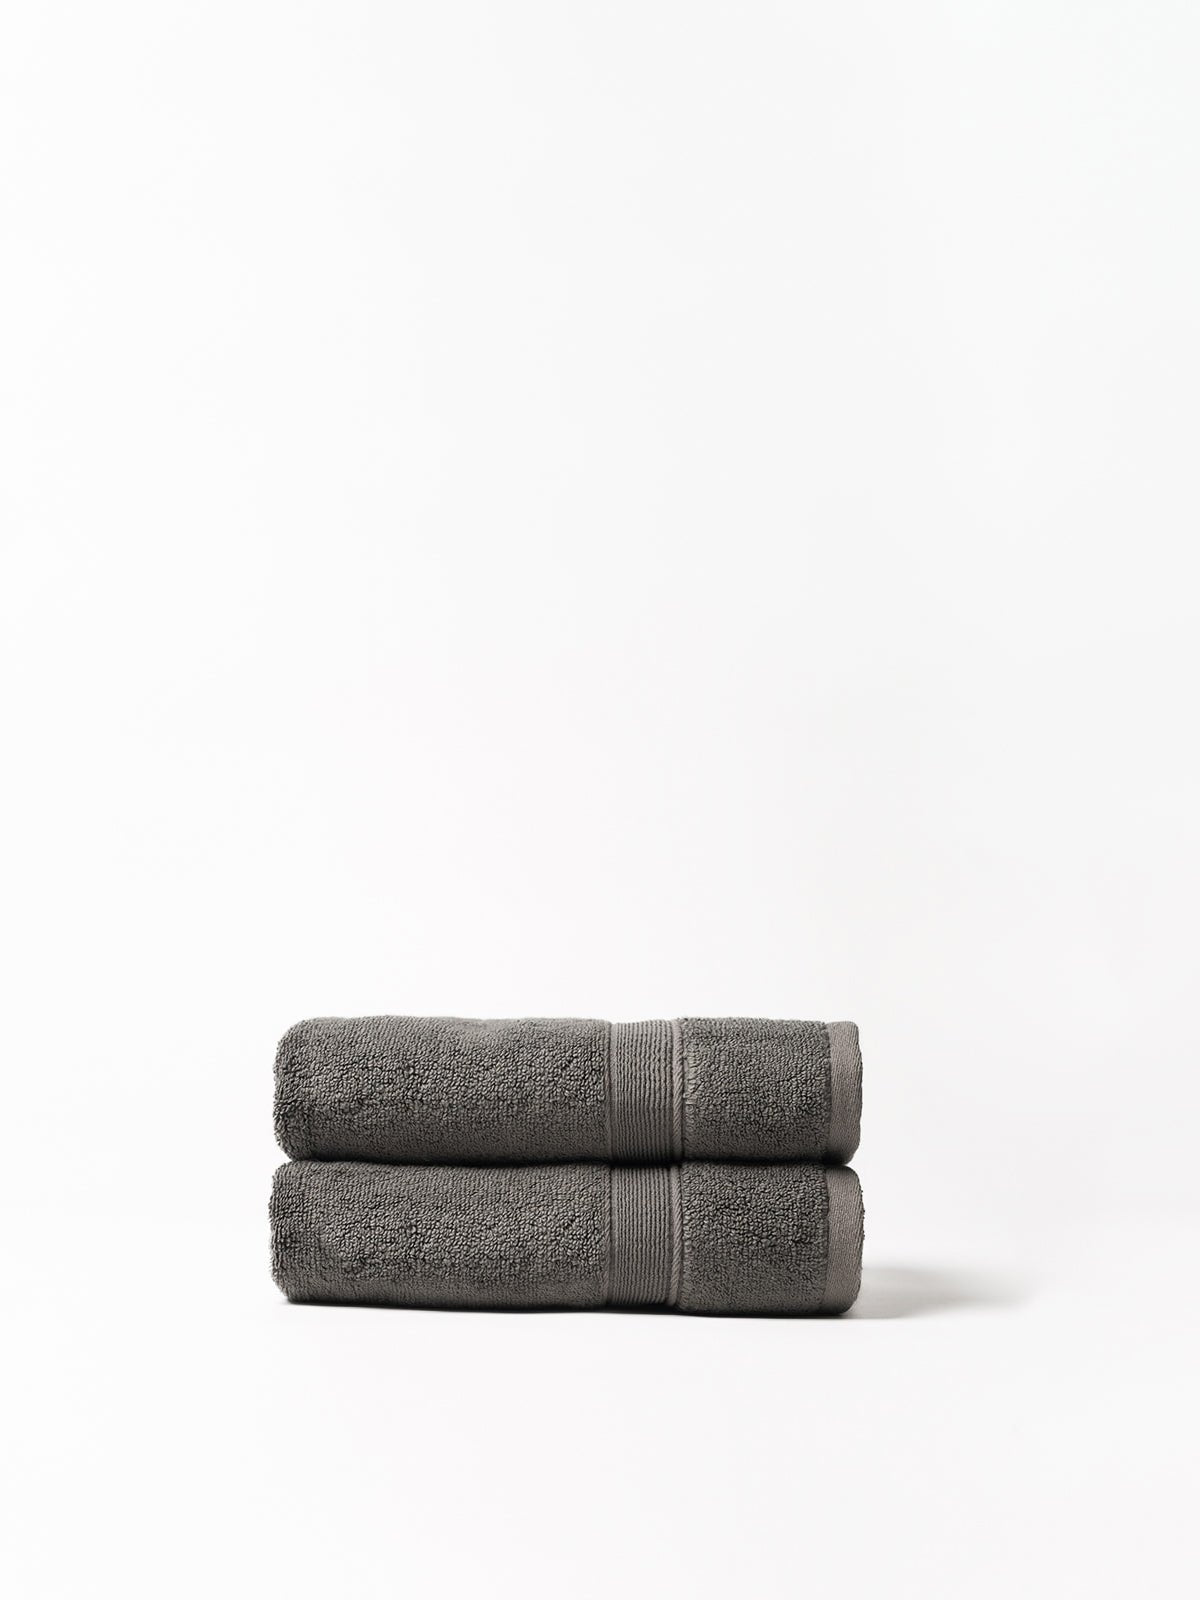 Charcoal luxe bath towels folded with white background |Color:Charcoal